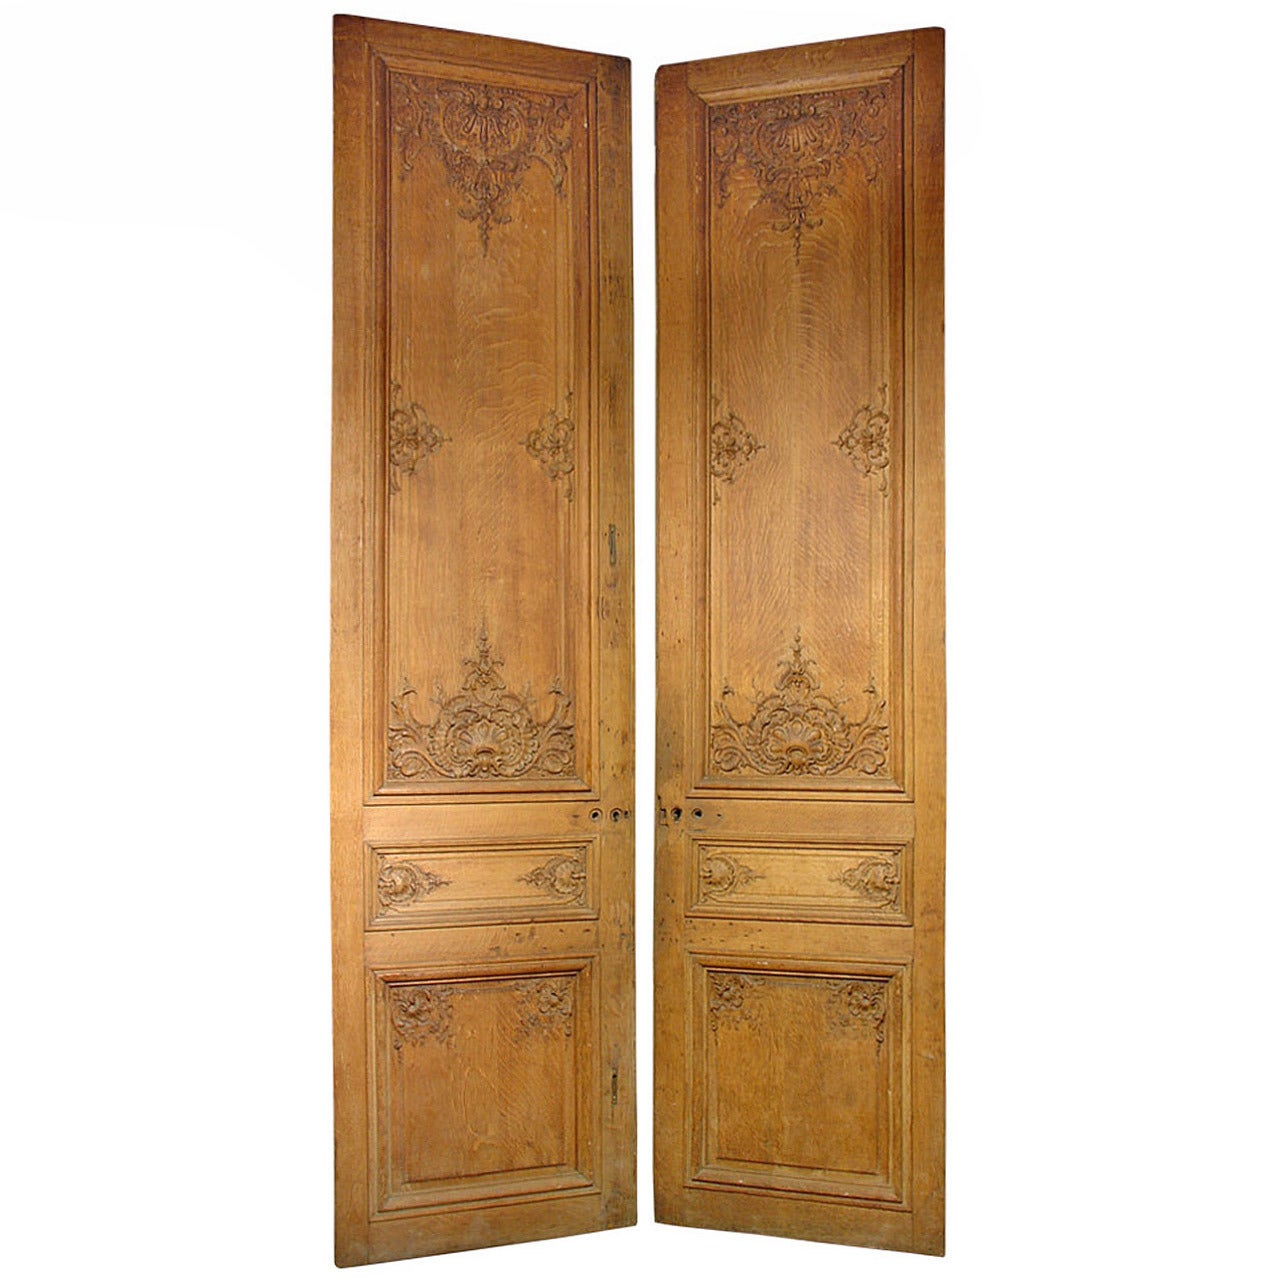 Pair of Tall Regence Style French Doors from the Early 1800s